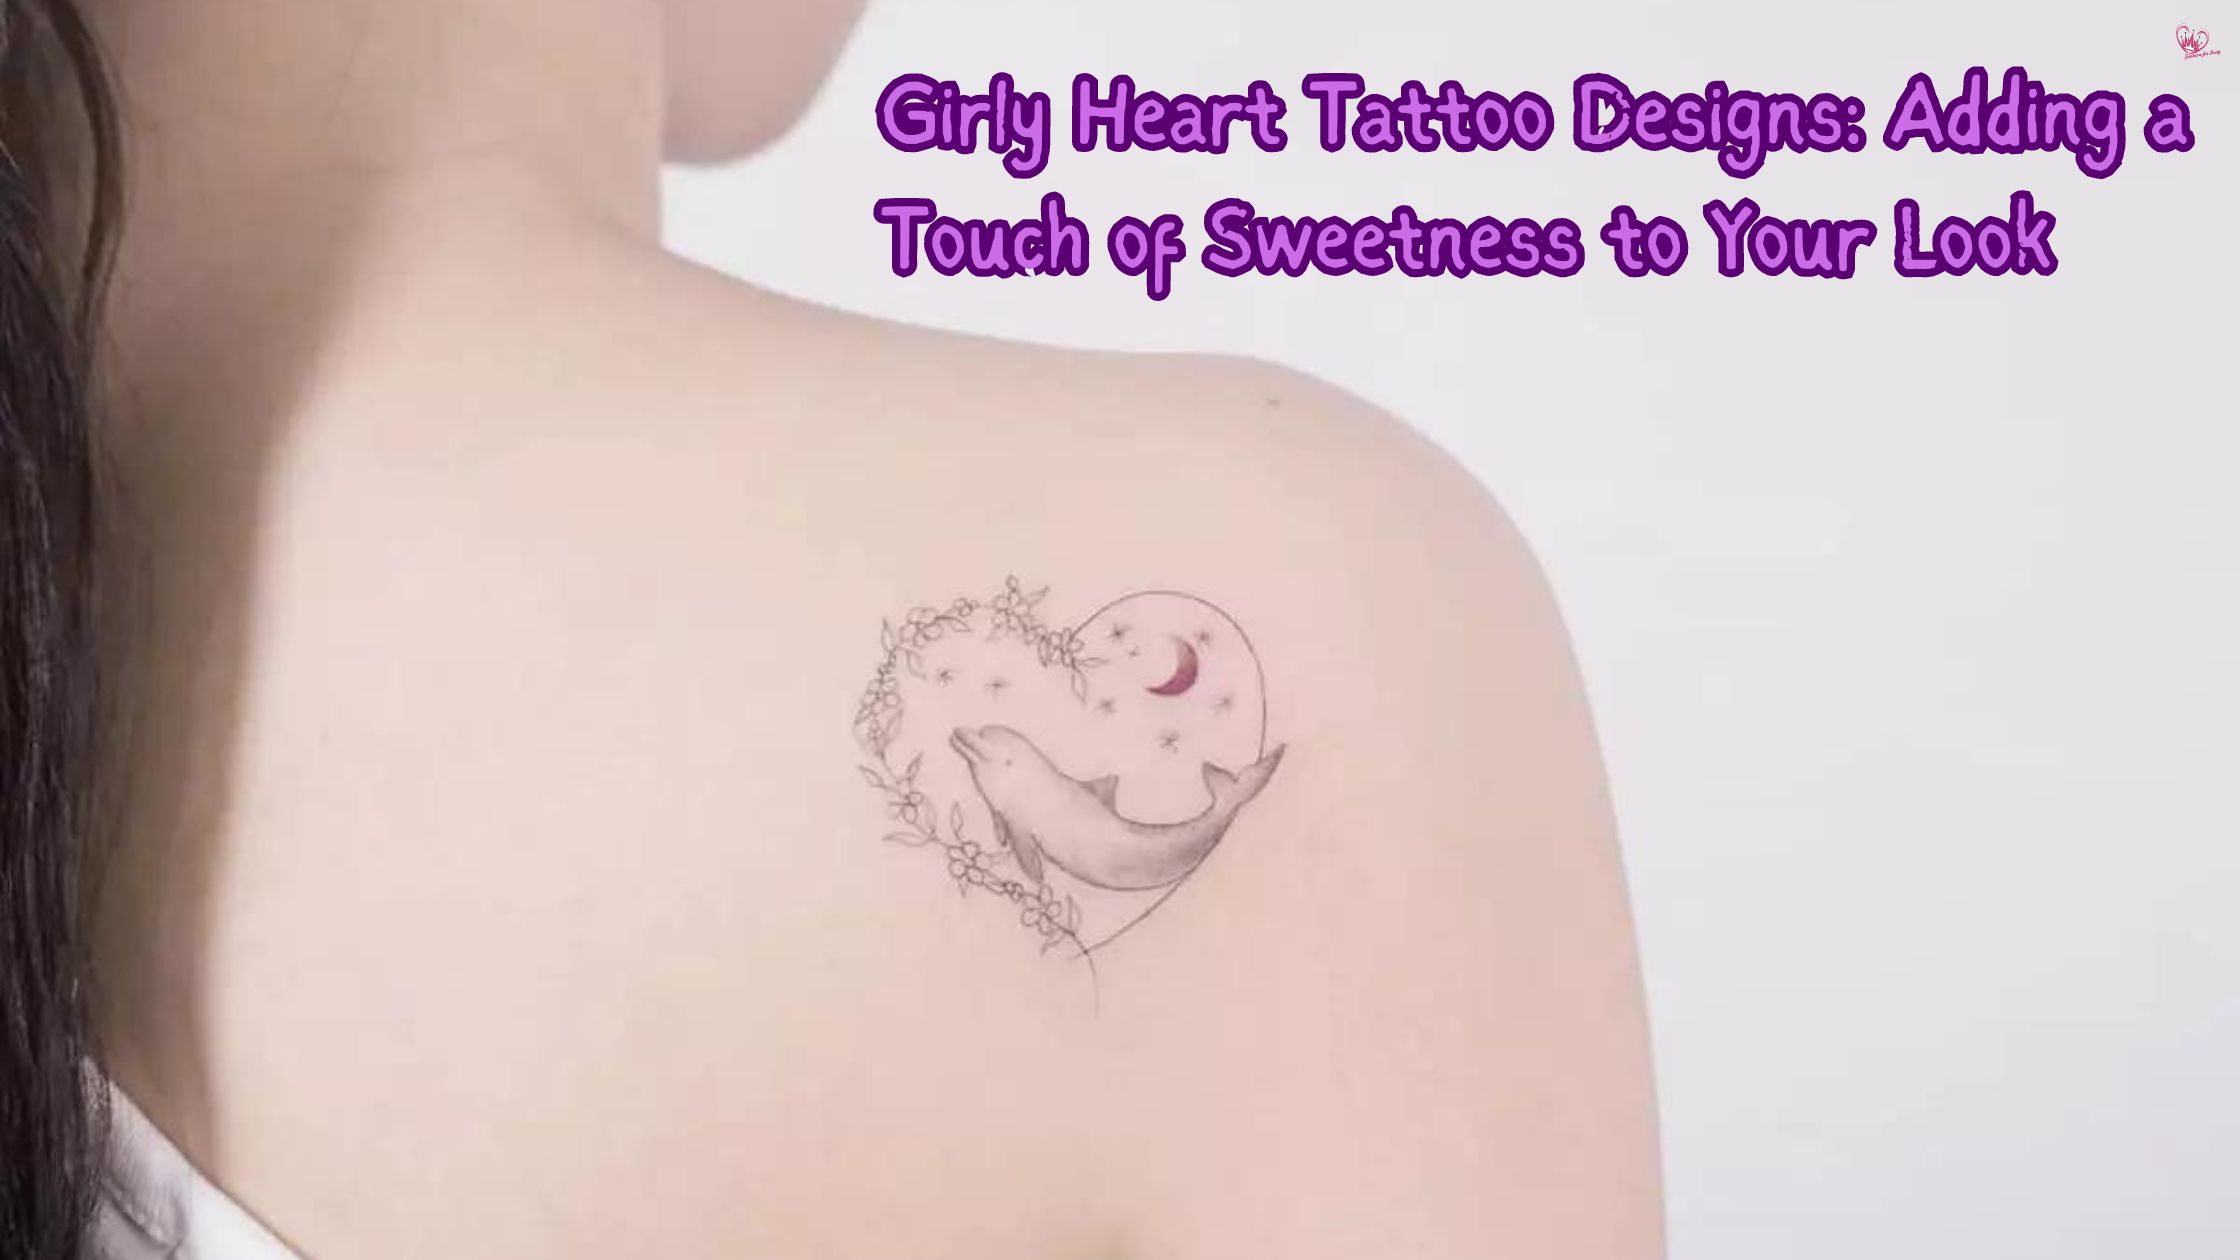 Girly Heart Tattoo Designs: Adding a Touch of Sweetness to Your Look